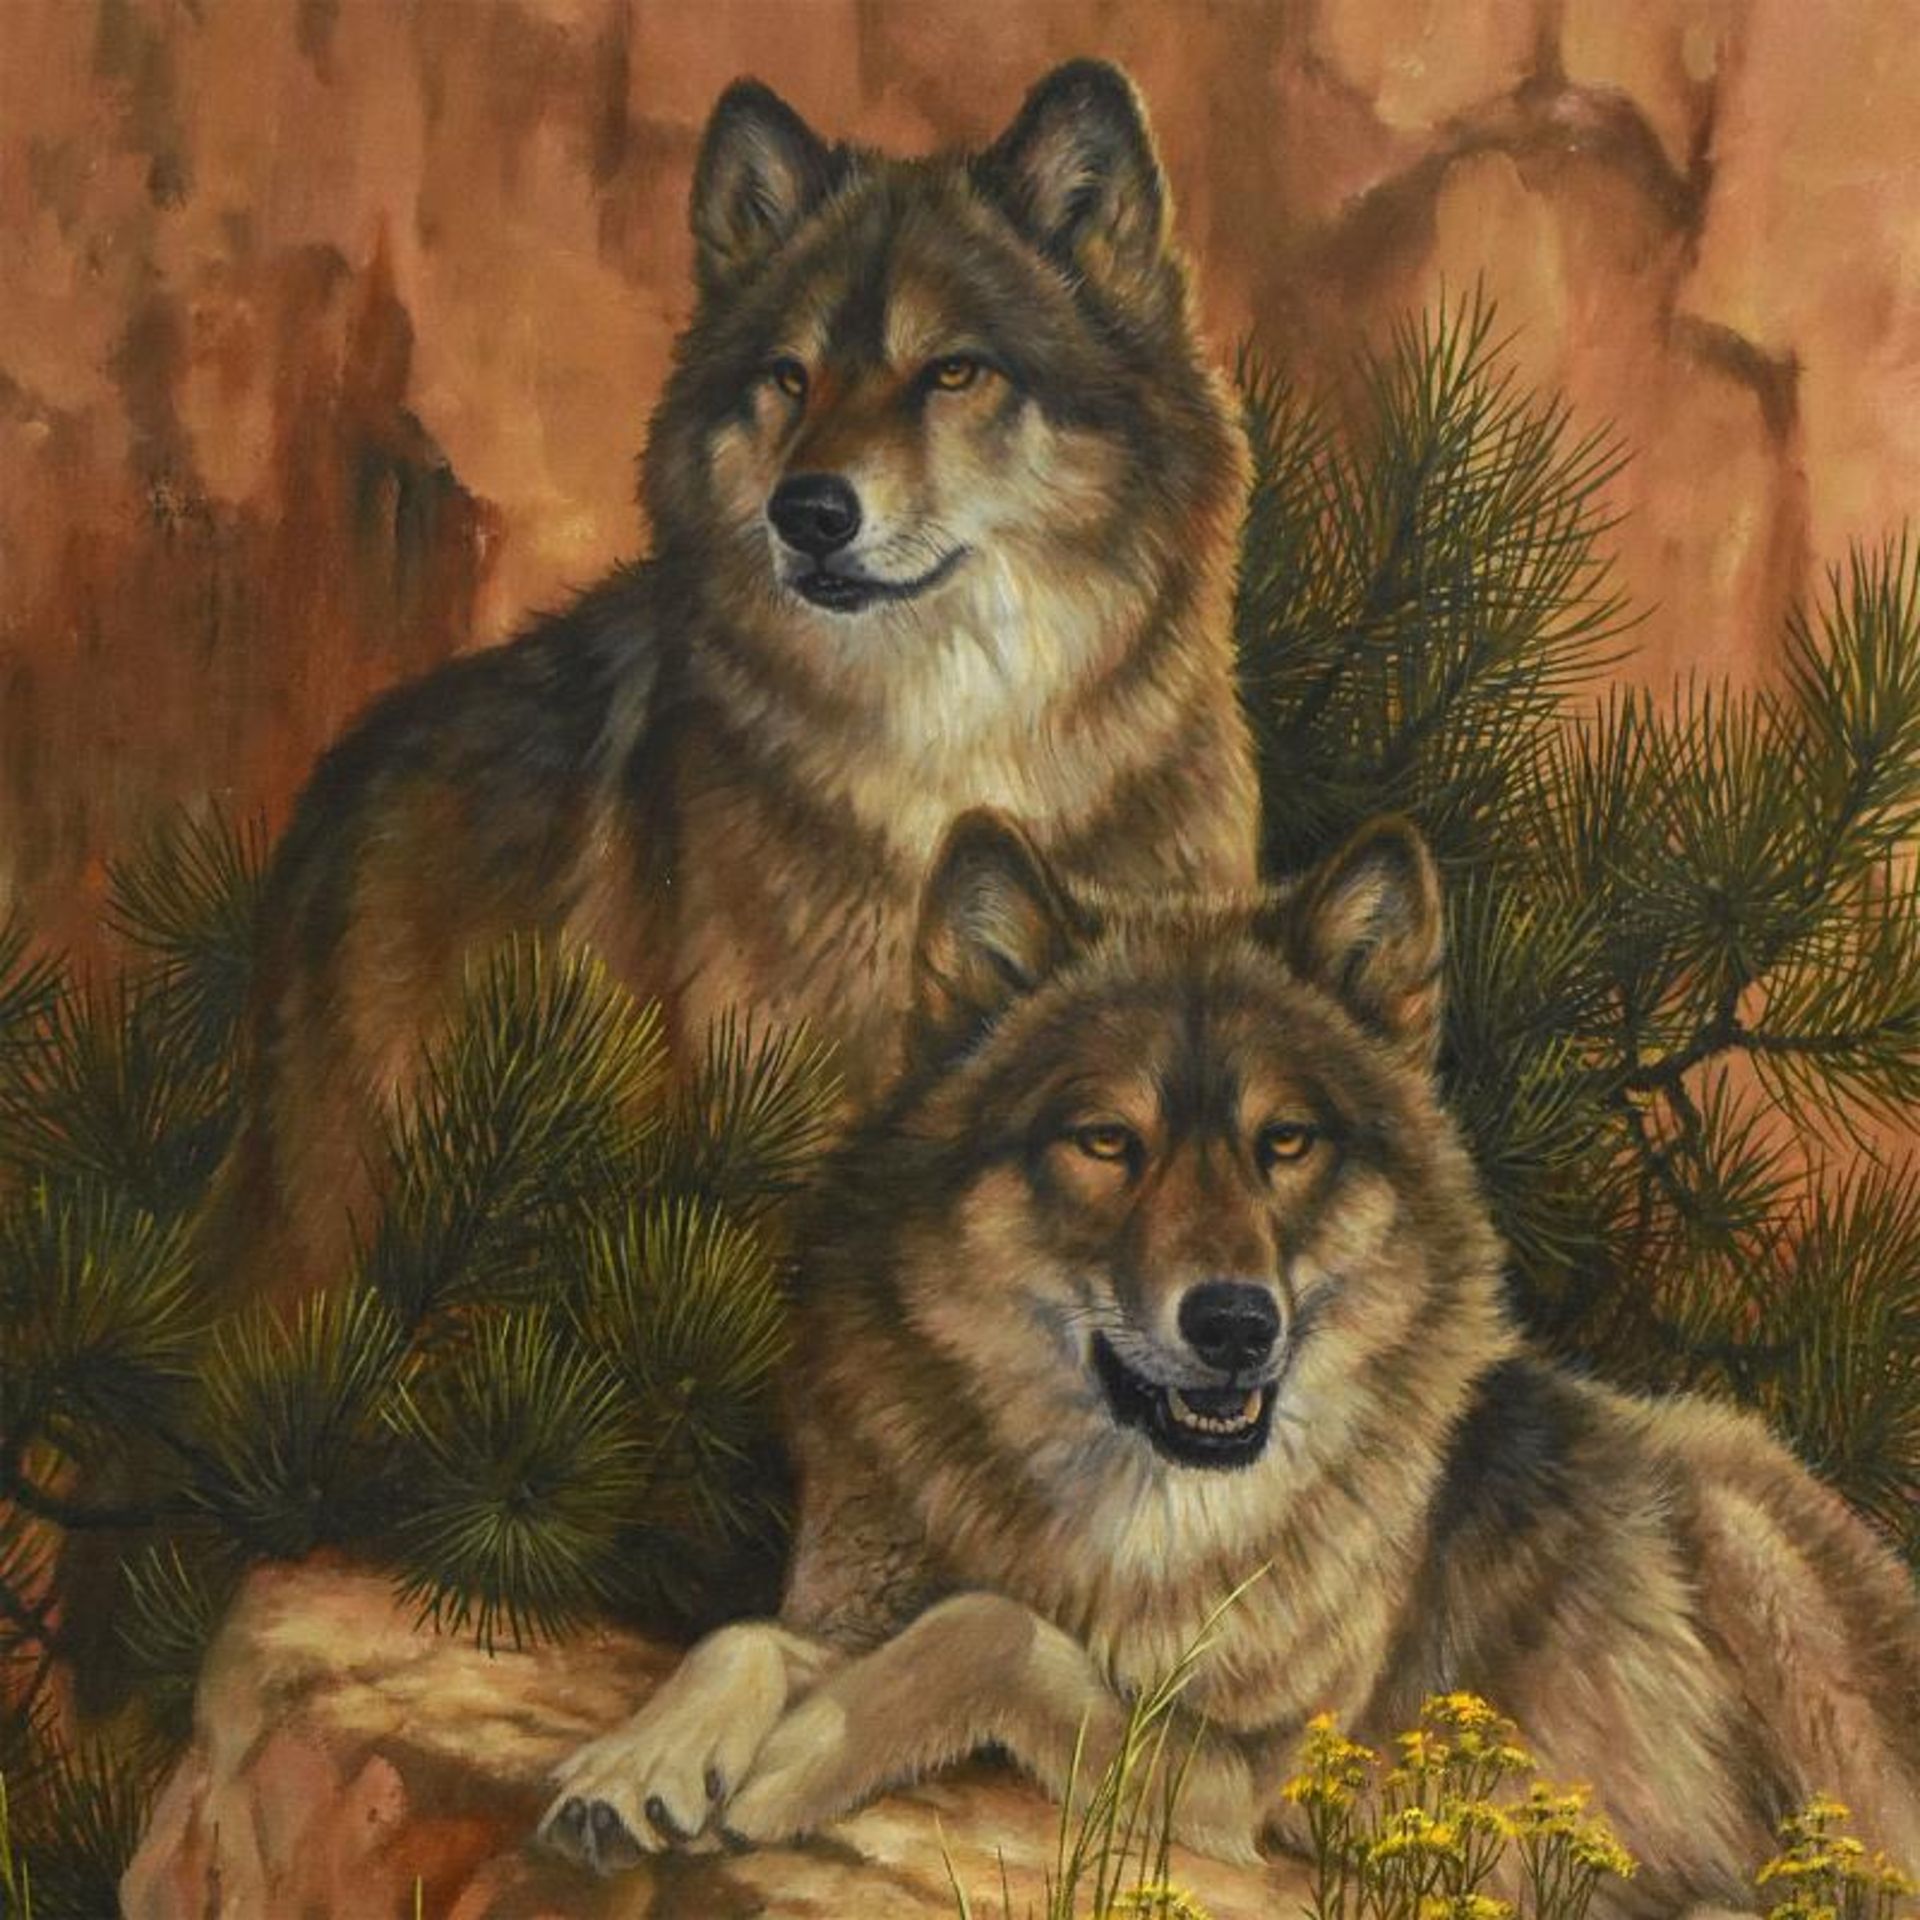 Summer Retreat - Gray Wolves by Fanning (1938-2014) - Image 5 of 6